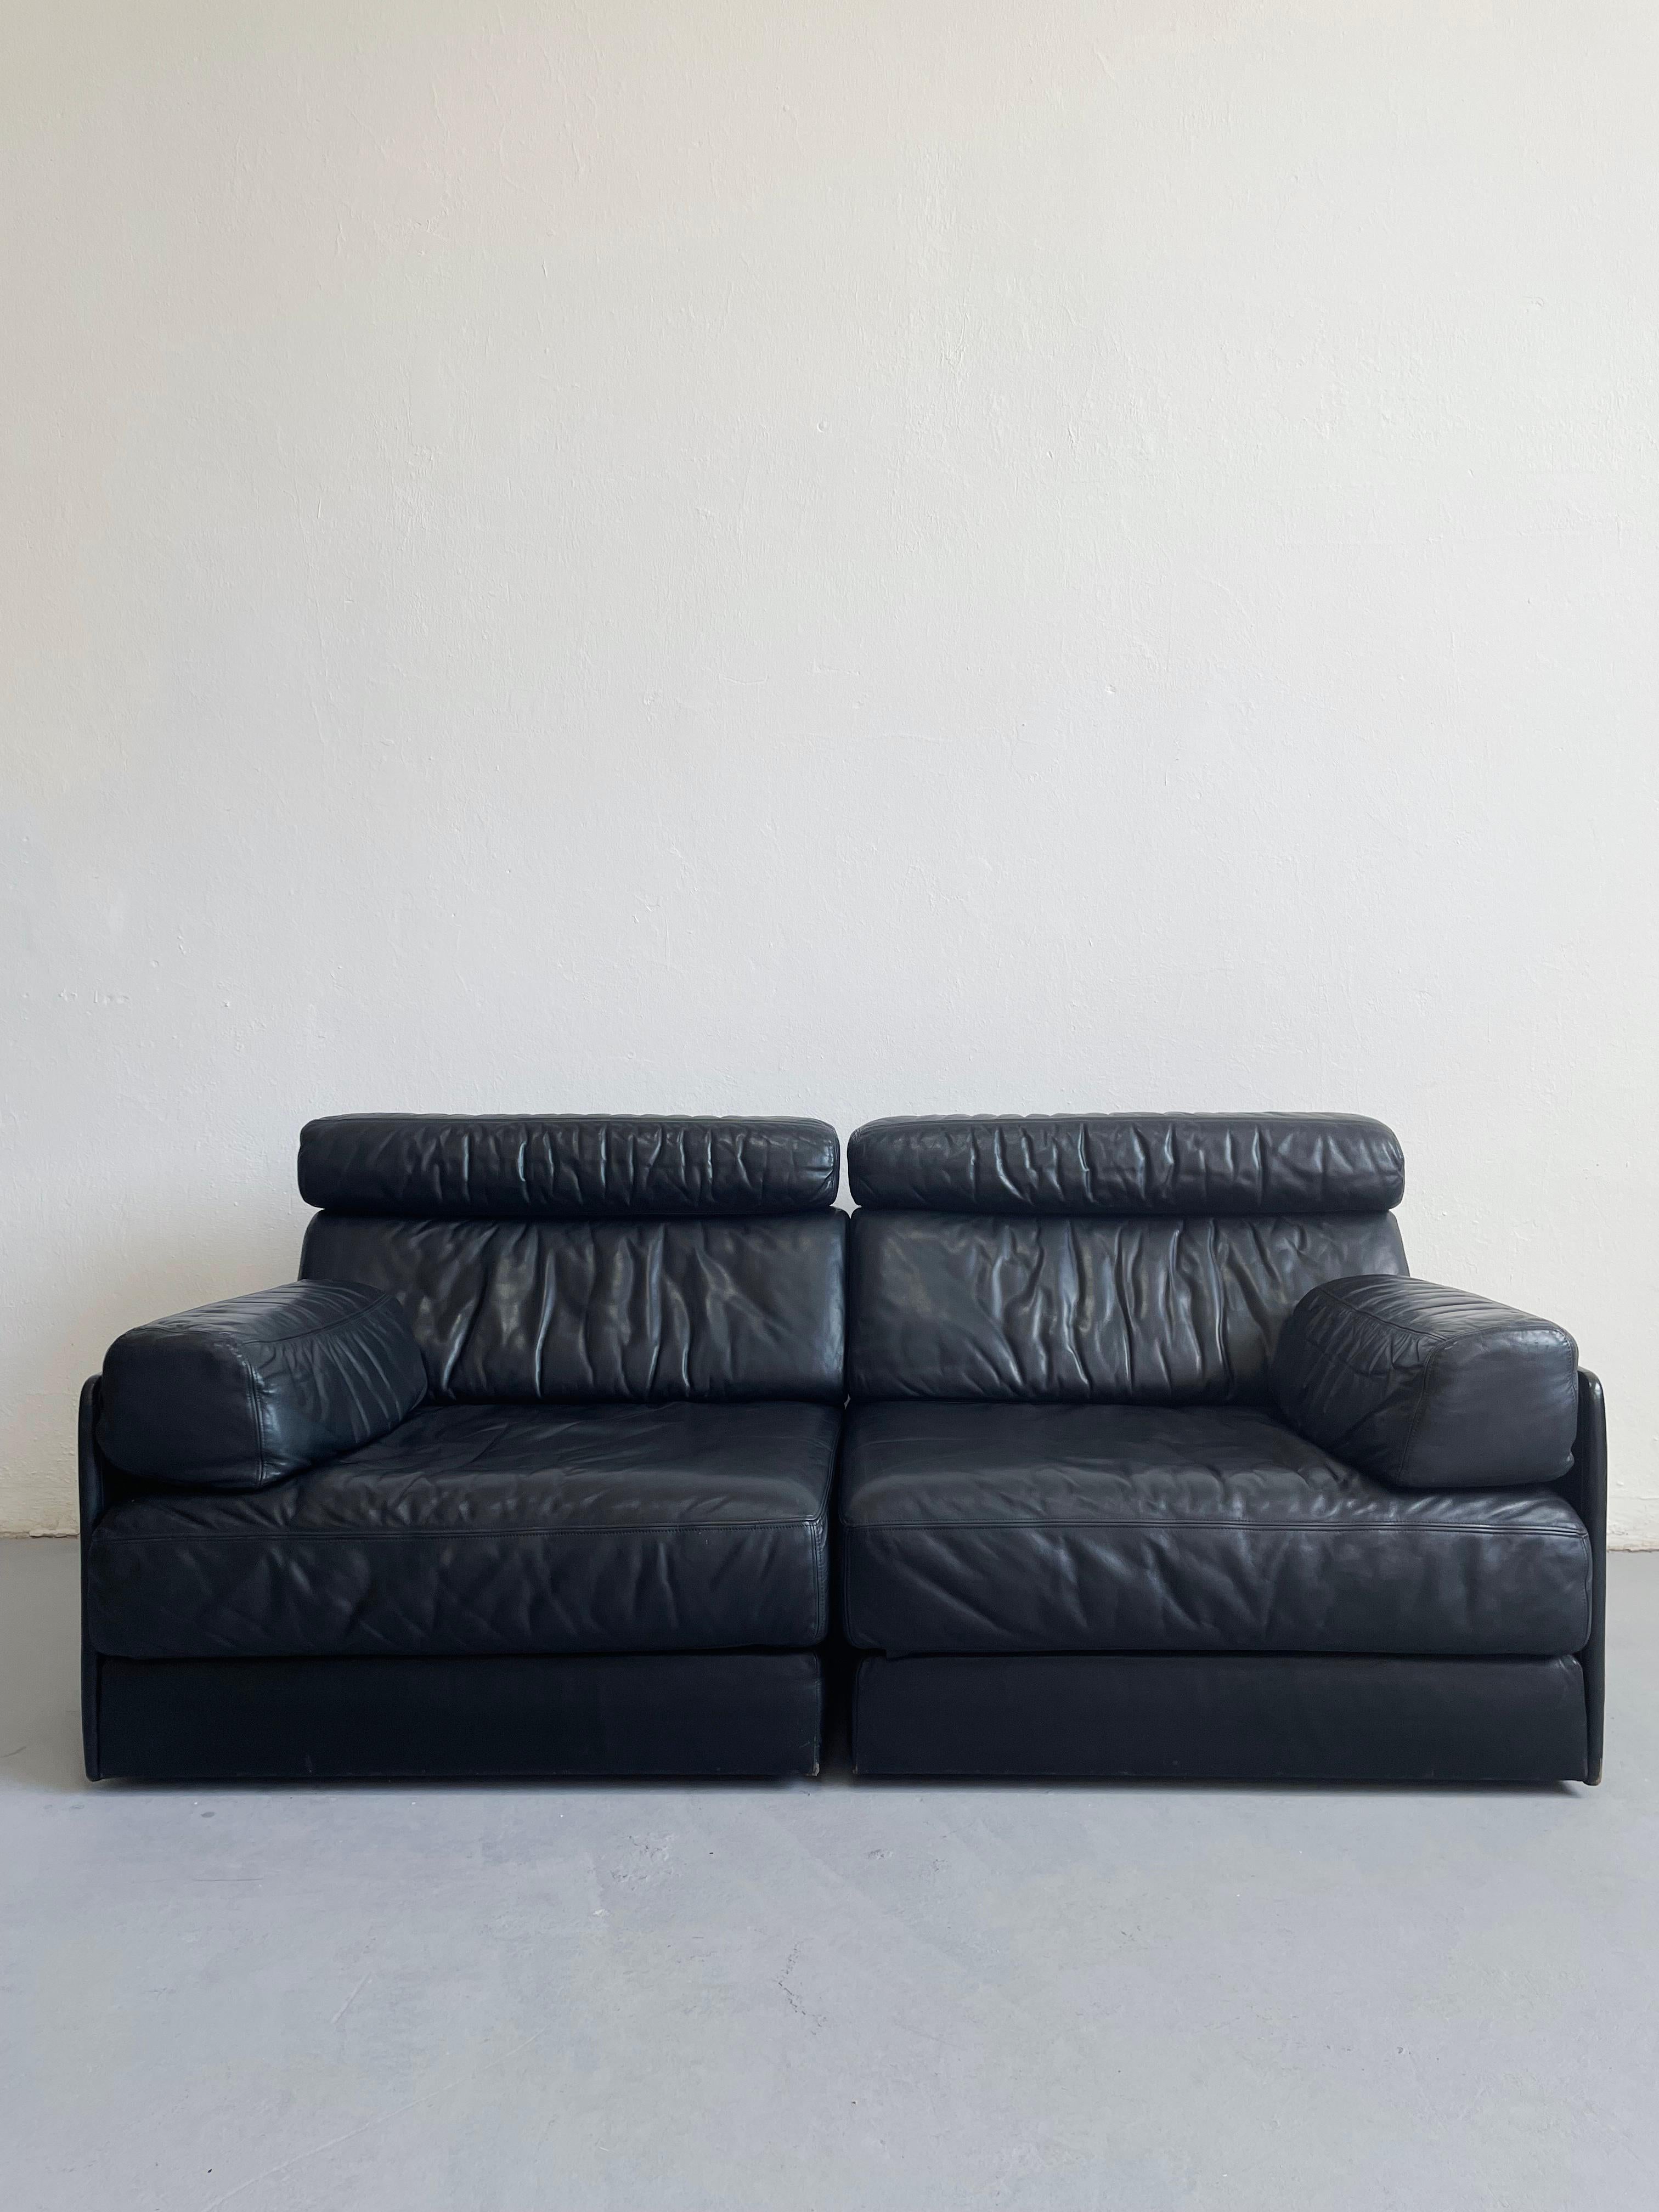 Late 20th Century Vintage De Sede Modular Two Seater 'DS-77' Sofa Bed in Black Leather